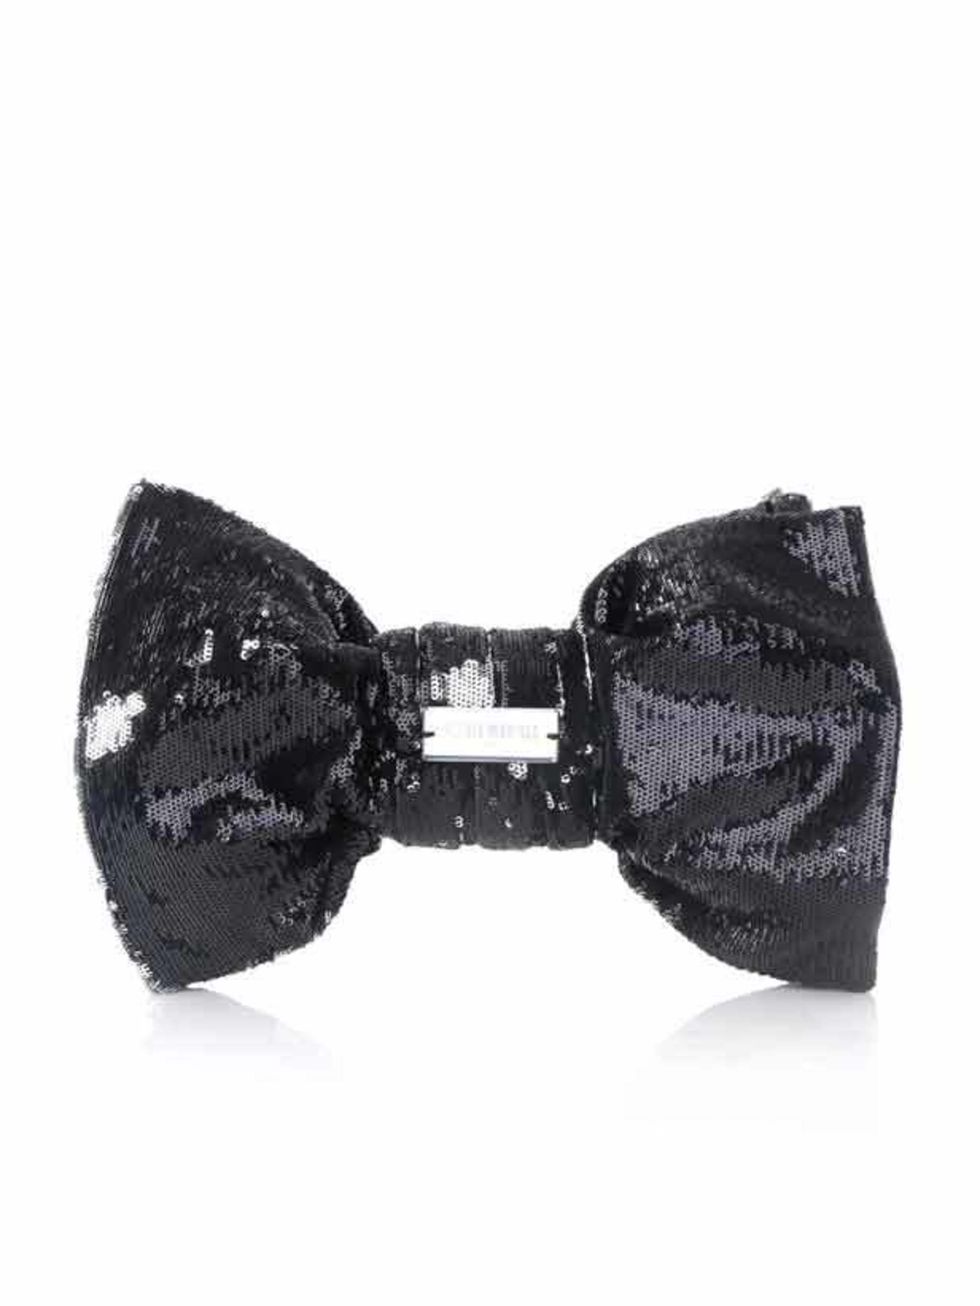 <p>Alexis Mabille Sequin bow bag, £538, at <a href="http://www.matchesfashion.com/fcp/product/Matches-Fashion/womens_alexis_mabille/alexis-mabille-AMA-Y-BB0100PAR-bags-BLACK/41255">Matches</a></p>